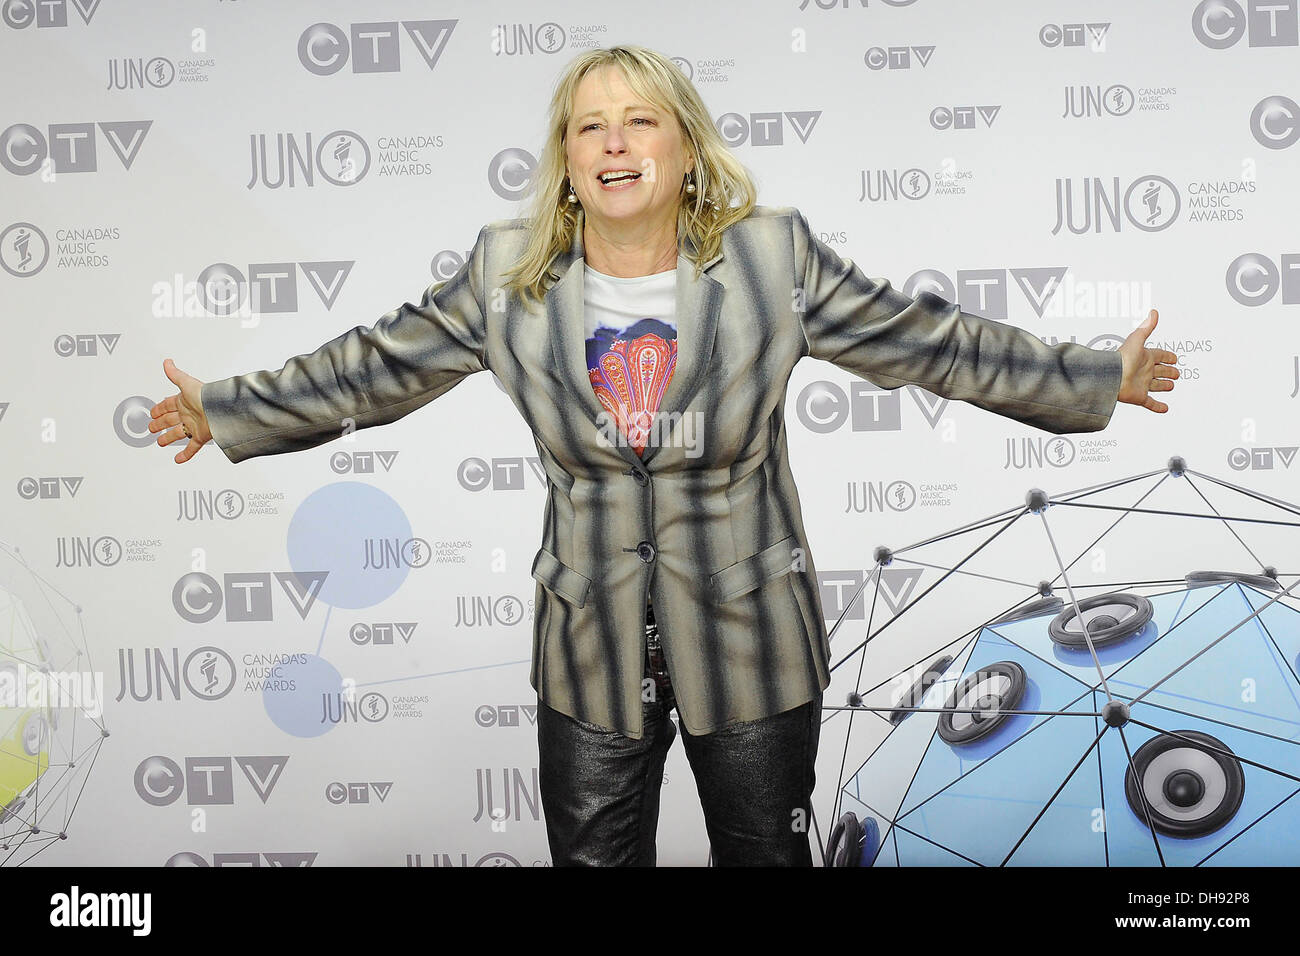 June Bunnett 2012 JUNO Awards arrival at The Scotiabank Place. Ottawa, Canada - 01.04.12 Stock Photo